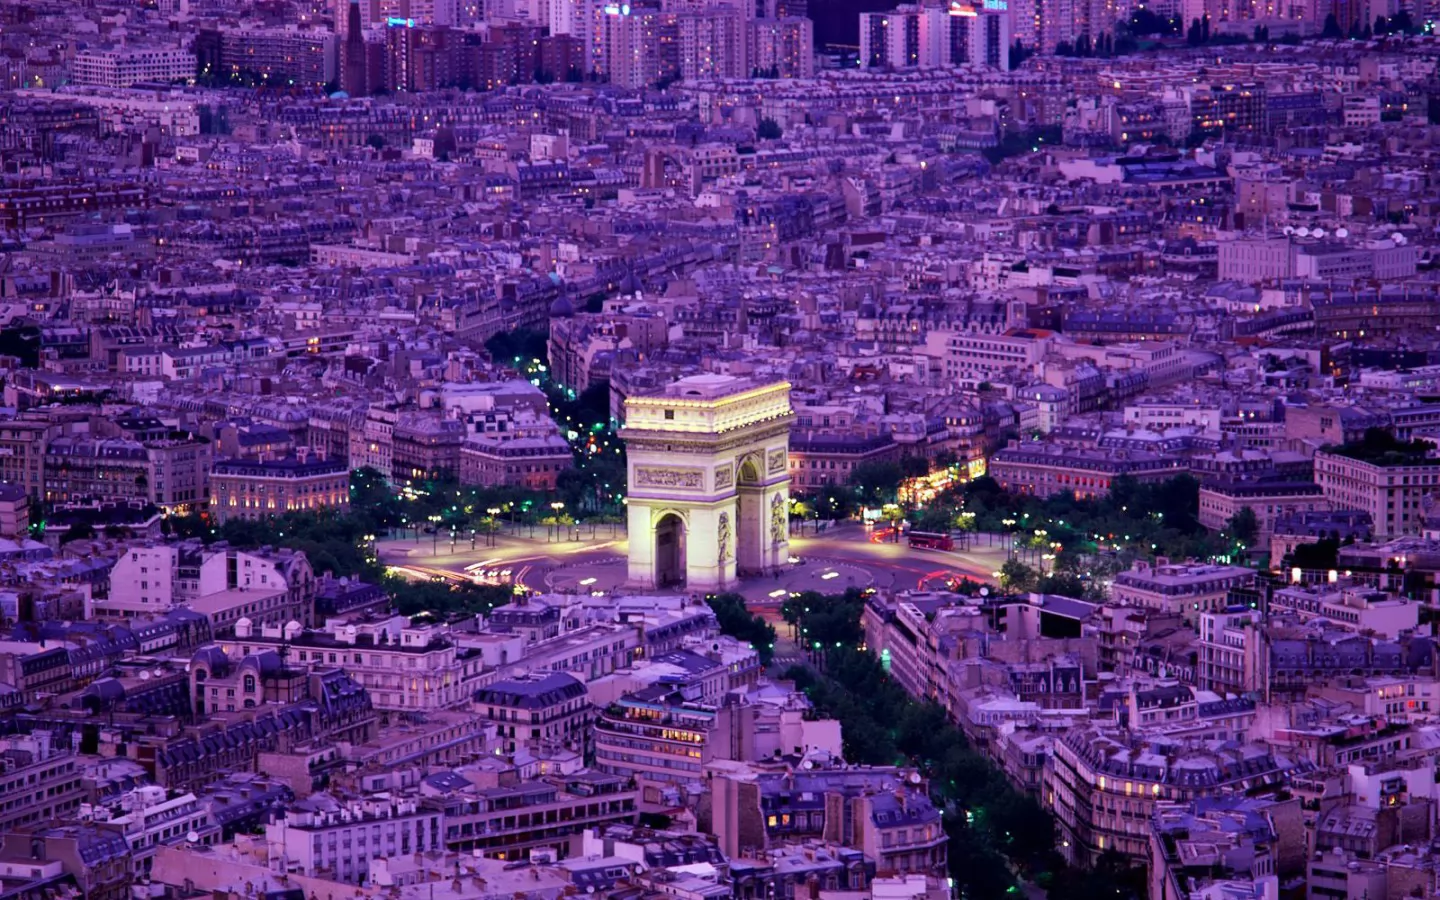 France. Paris, best, cities and countries, Europe, France, lilac, Paris x